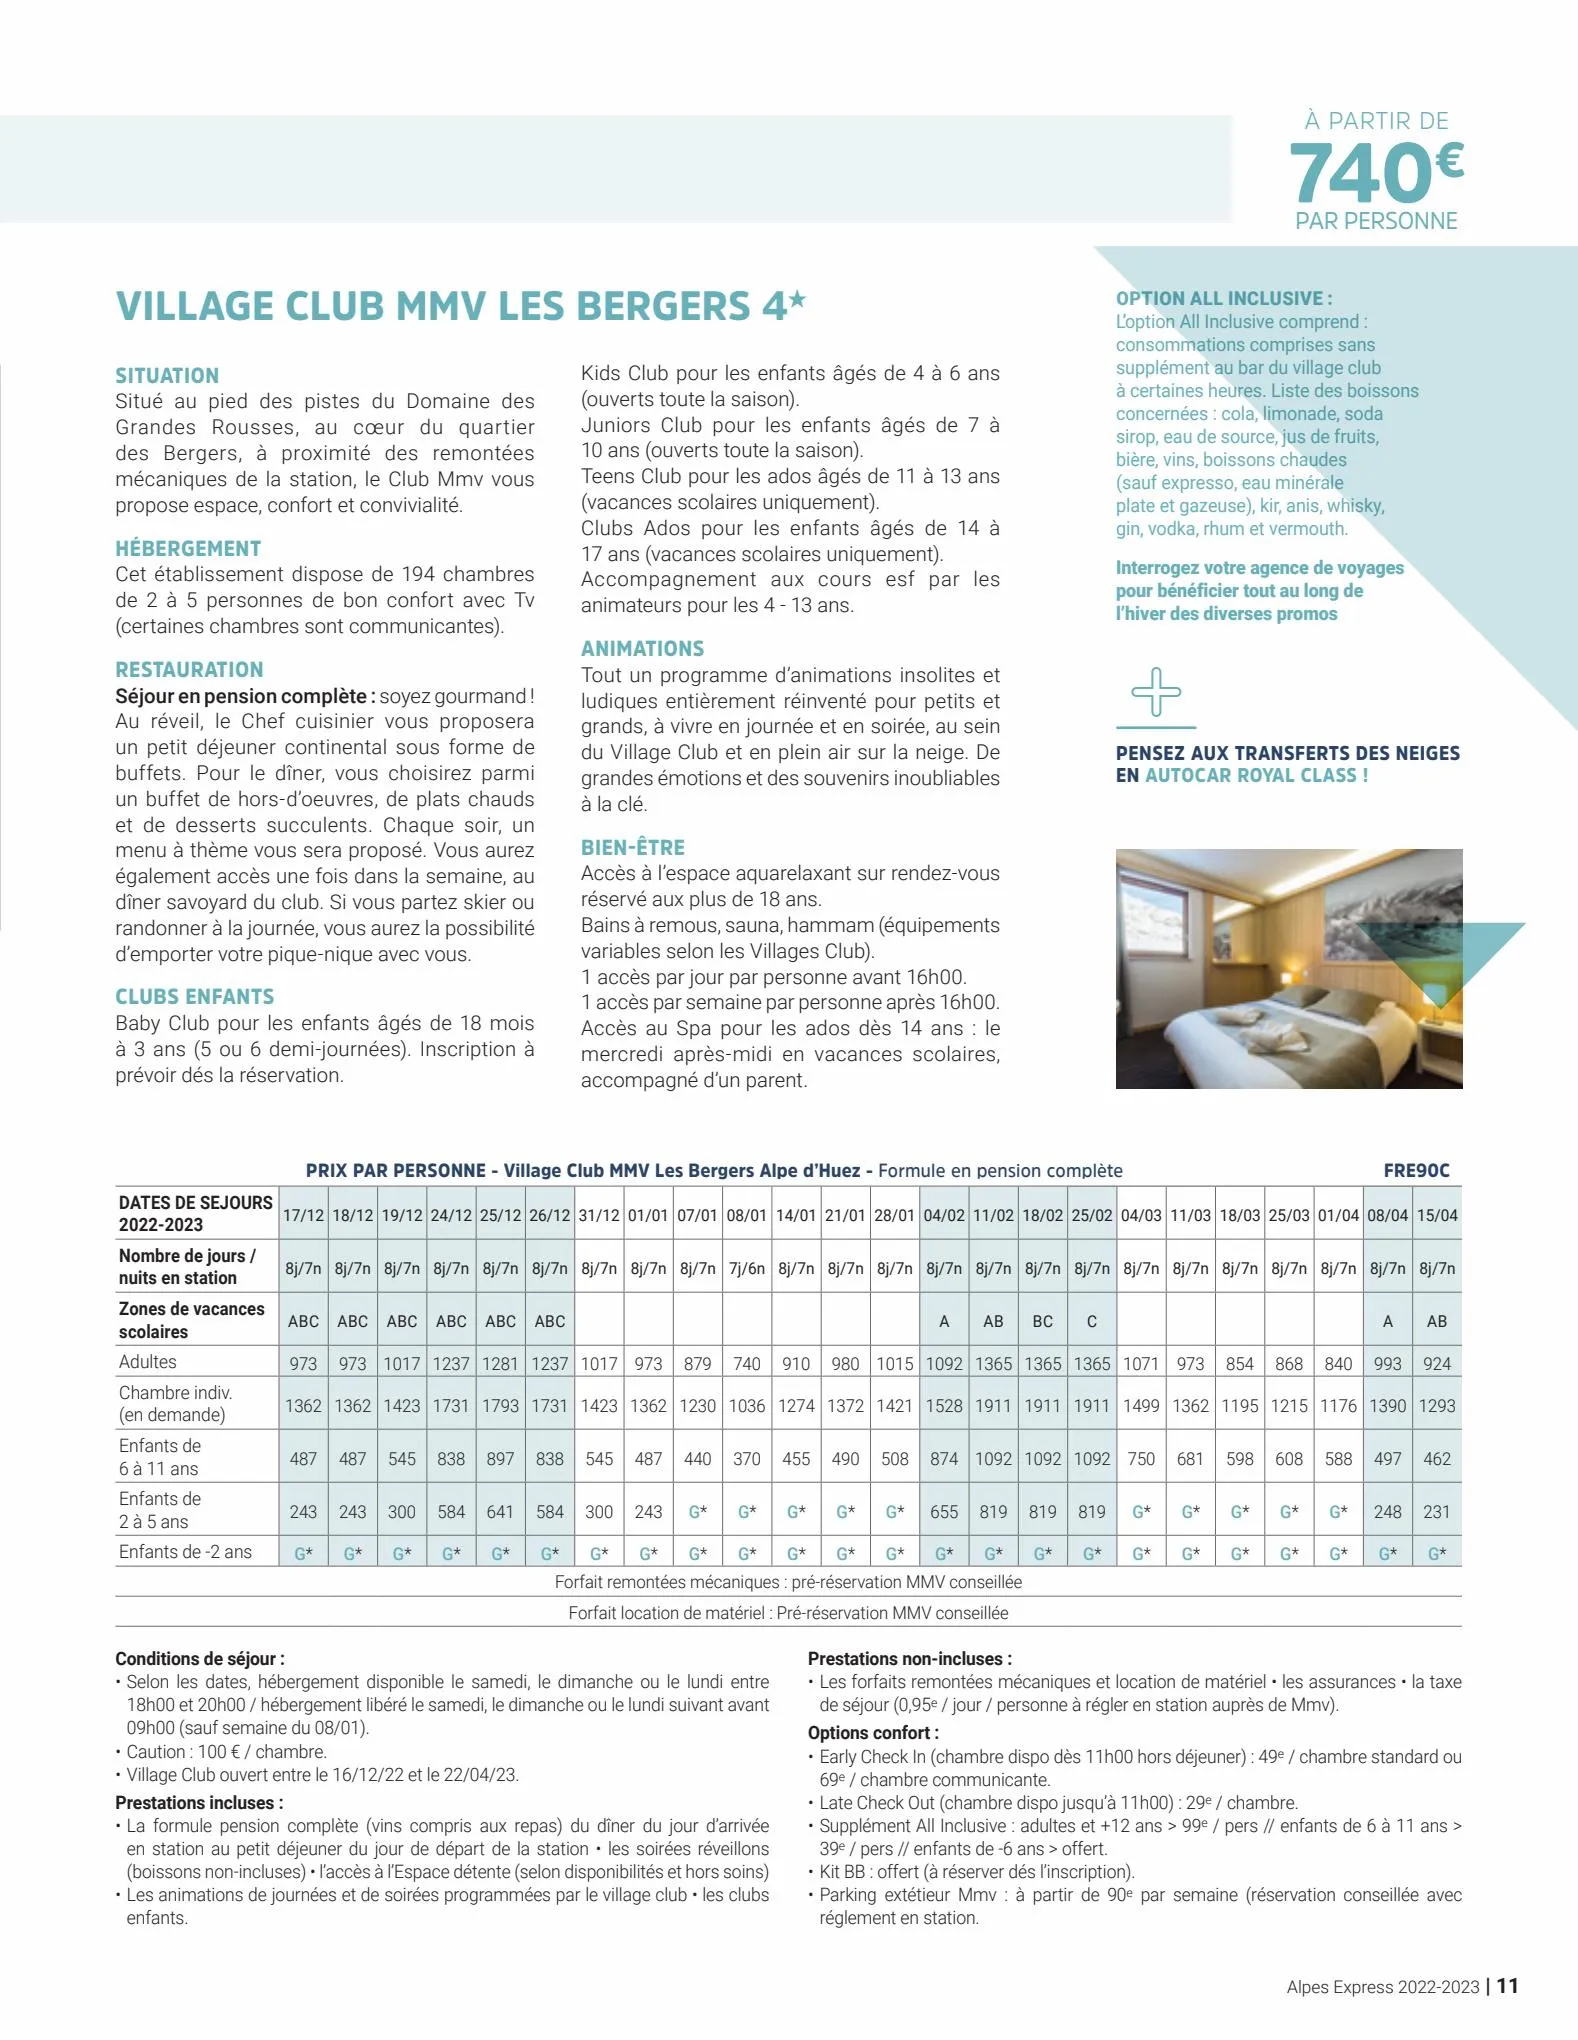 Catalogue Alpes Express - Hiver 2022-2023, page 00011